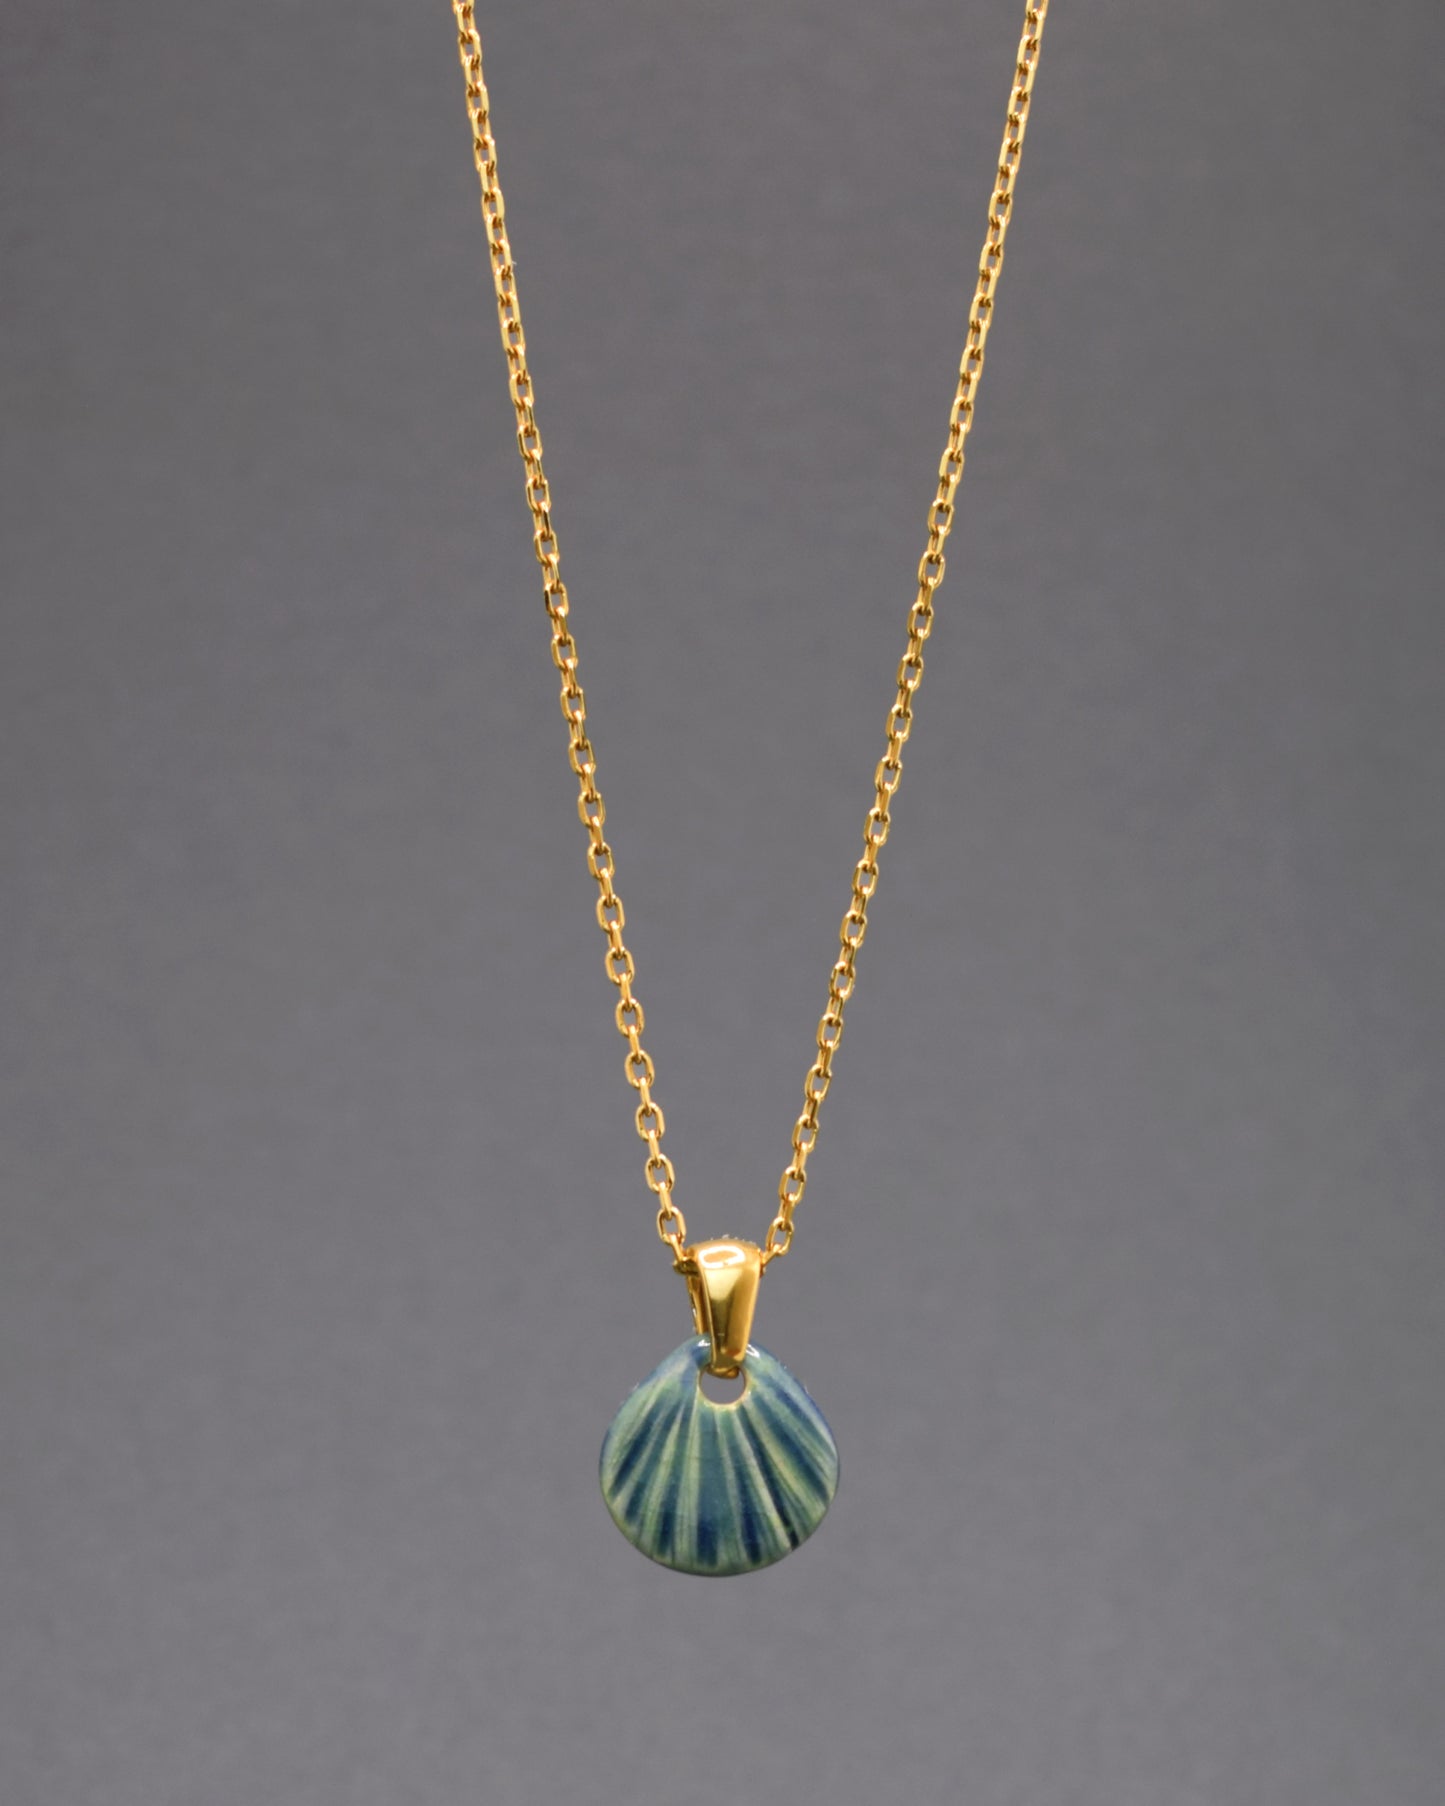 Moss Green Shell Necklace